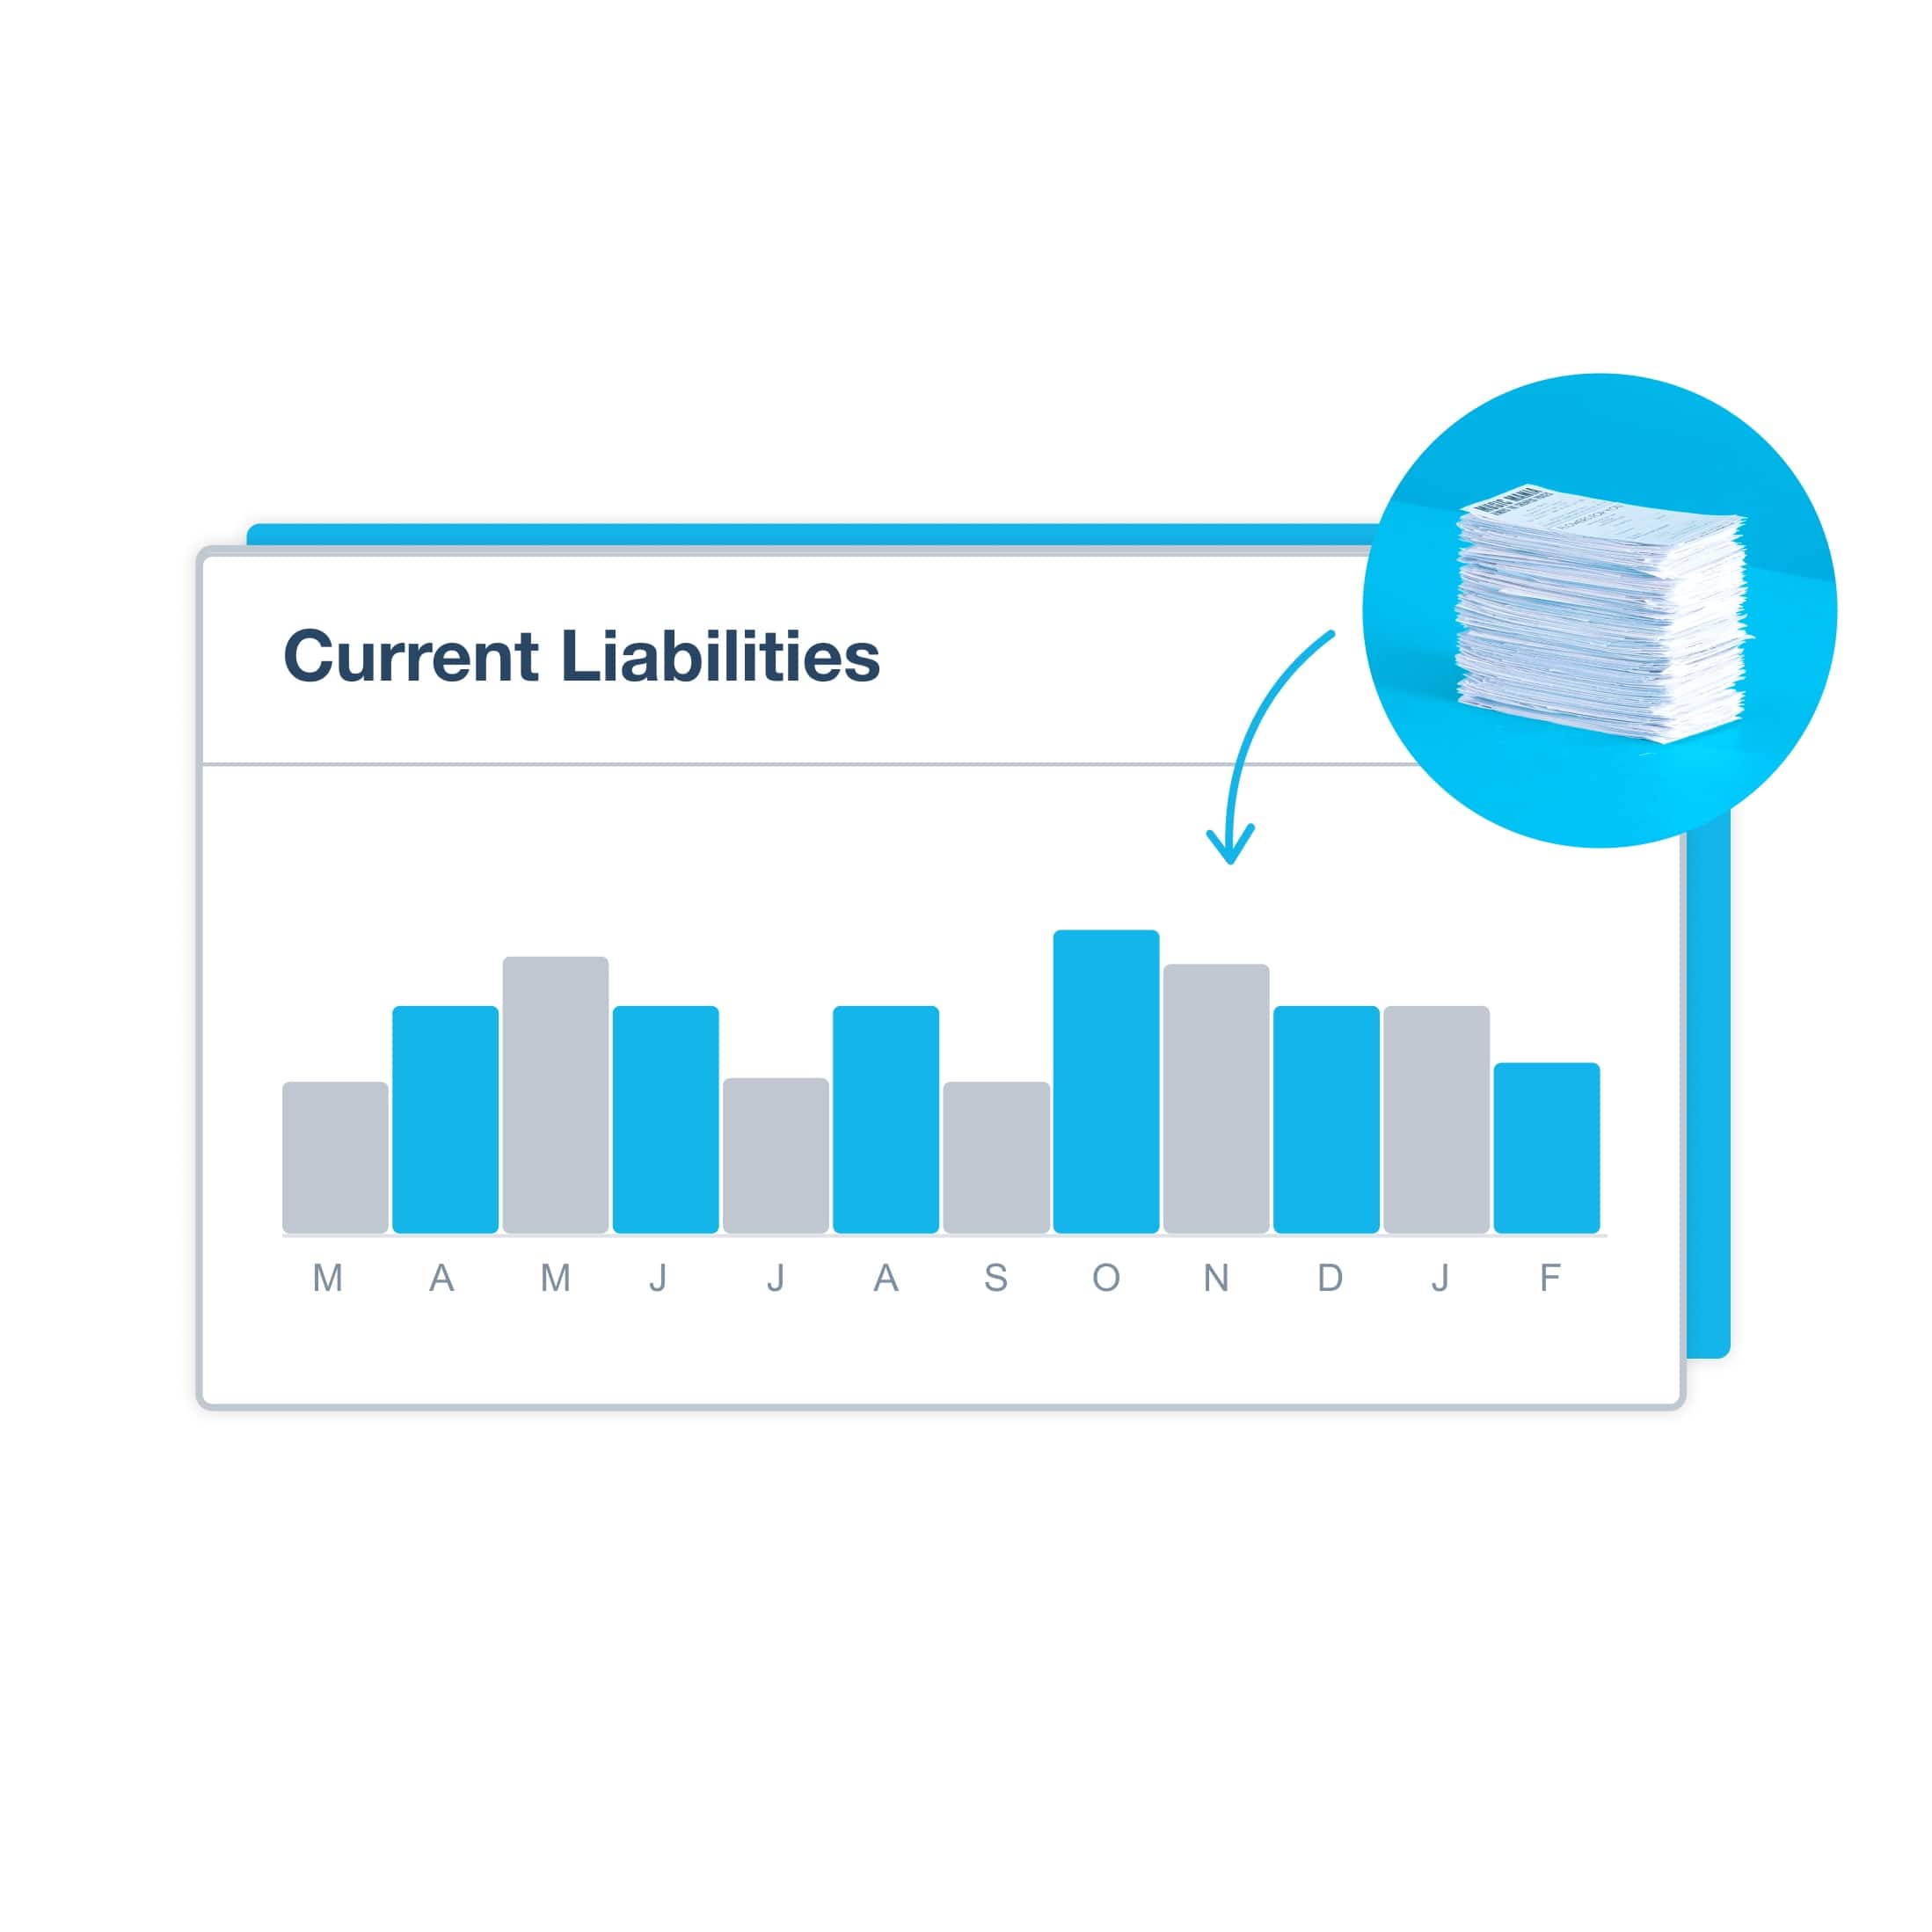 The Xero dashboard shows a bar chart of current liabilities to net worth for the year, as well as a 12-month average value.